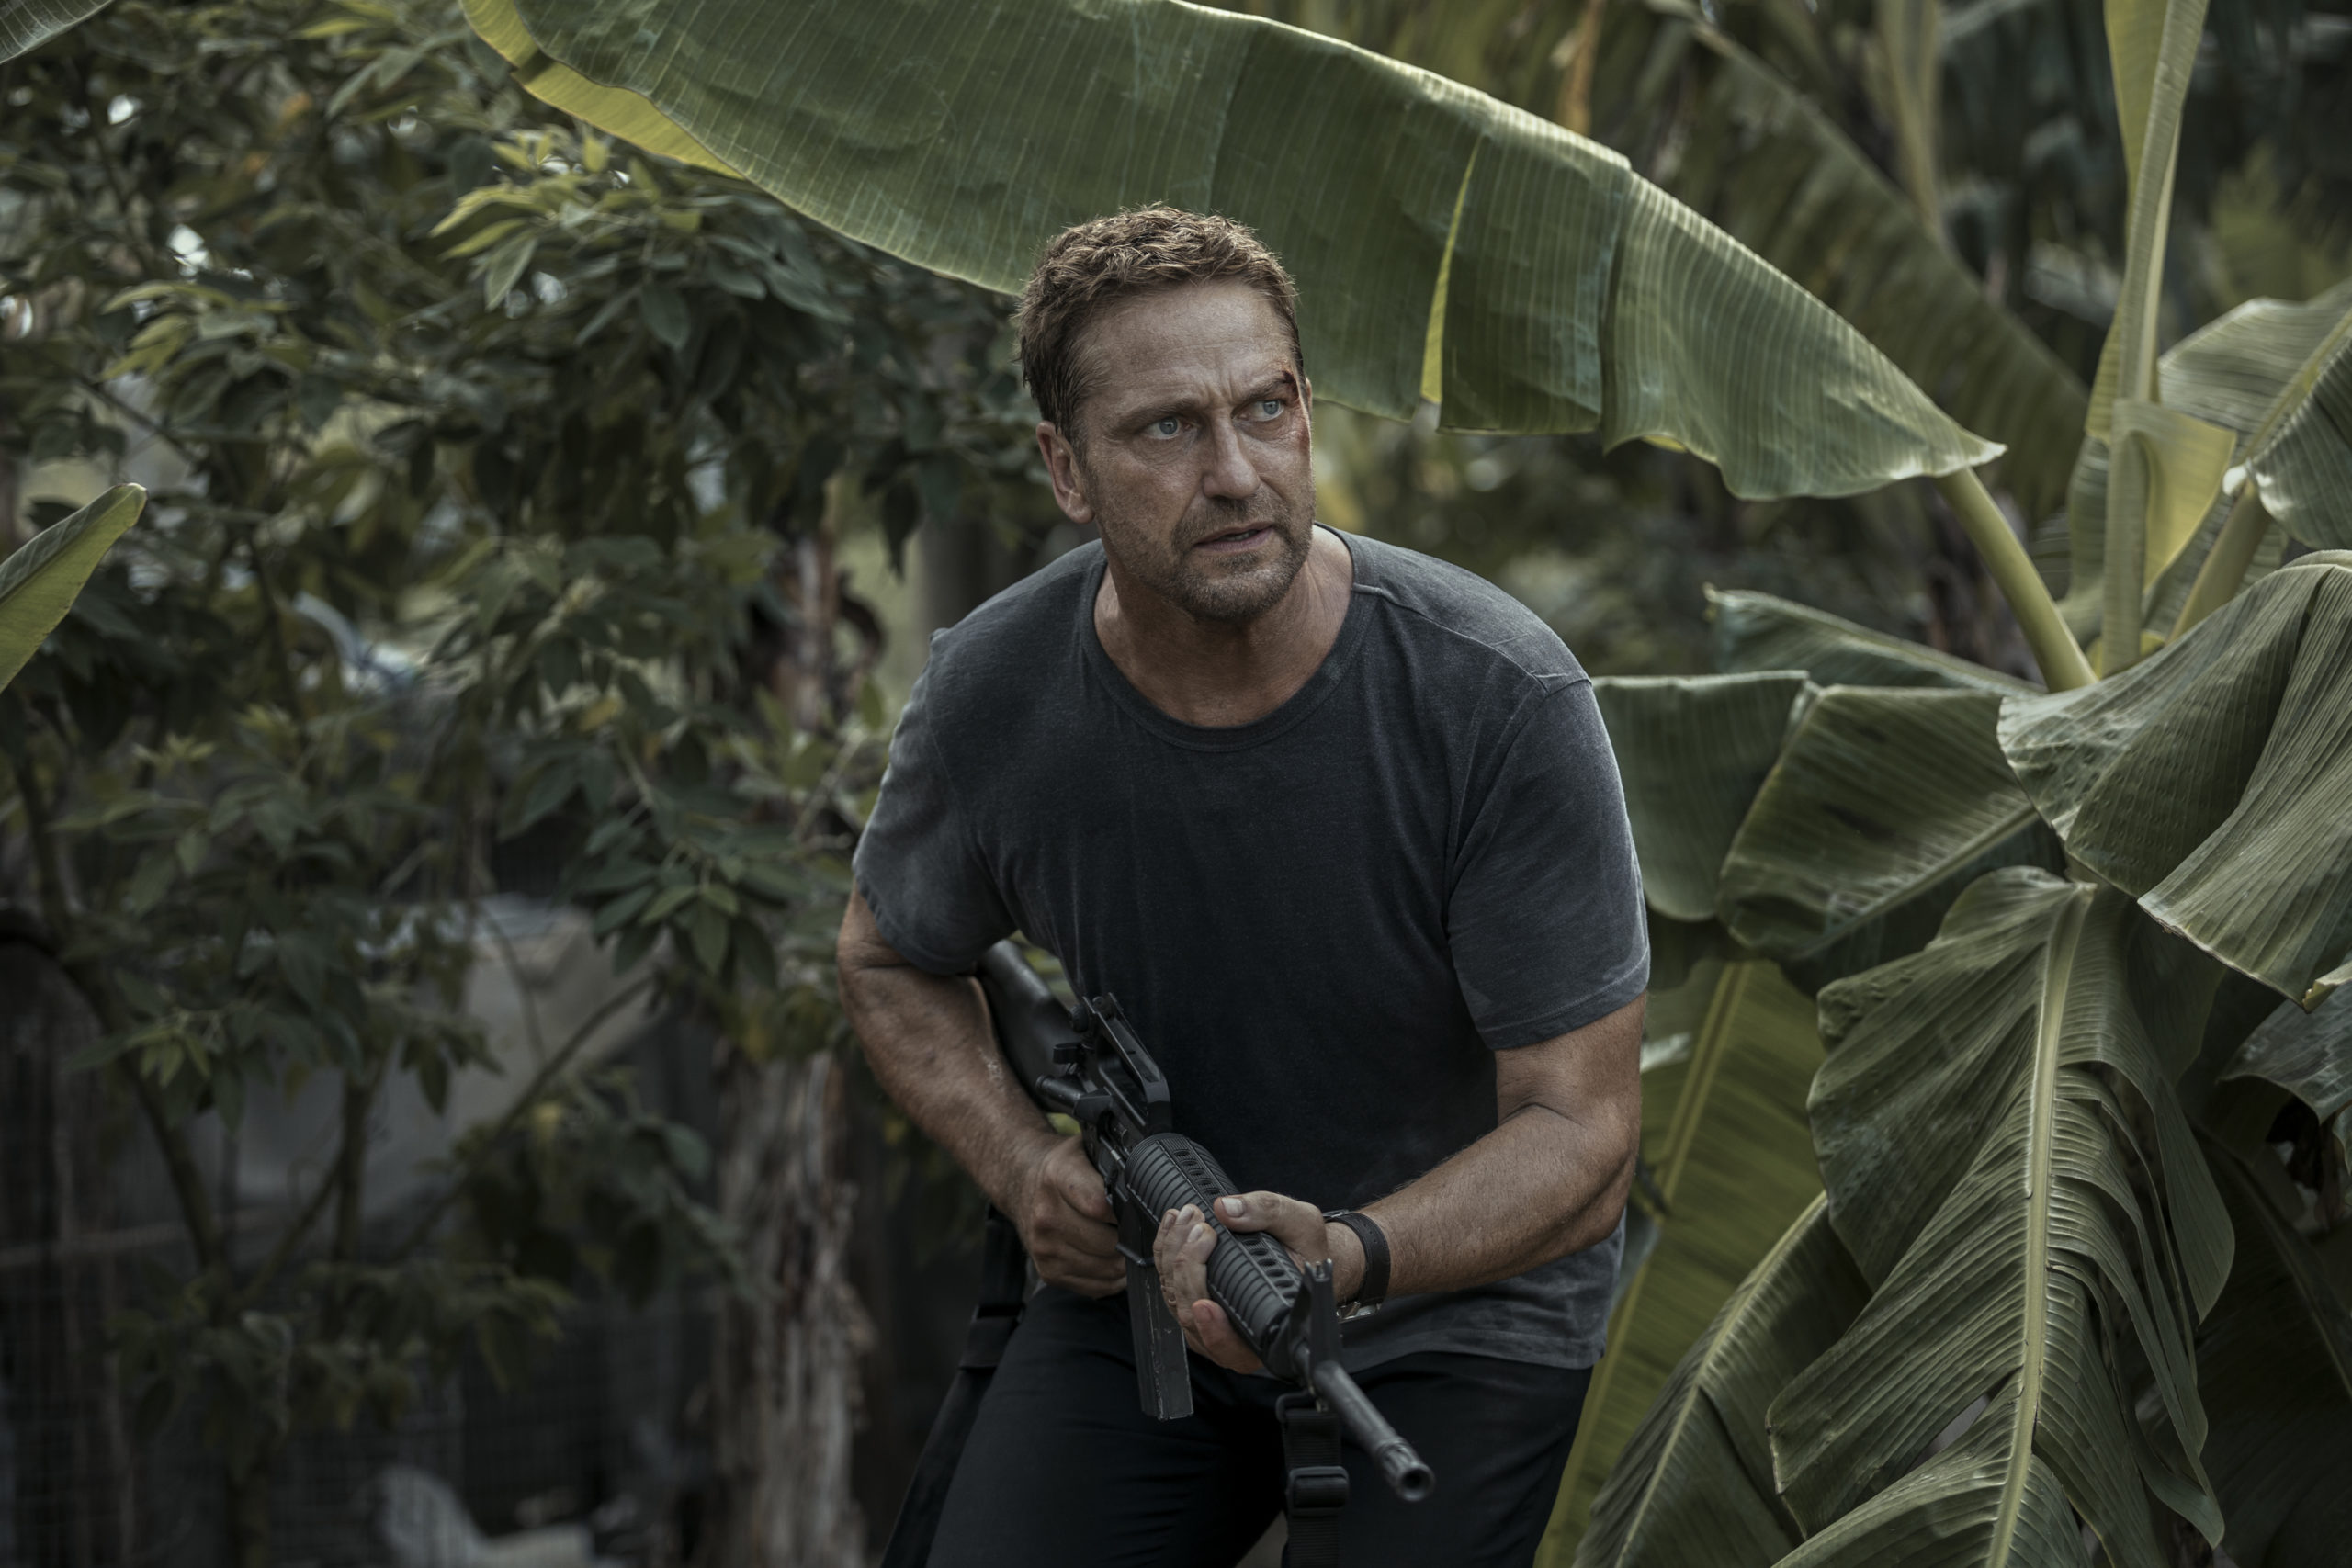 Plane Trailer Has Gerard Butler Reminds Us The Pilot Can Do Anything